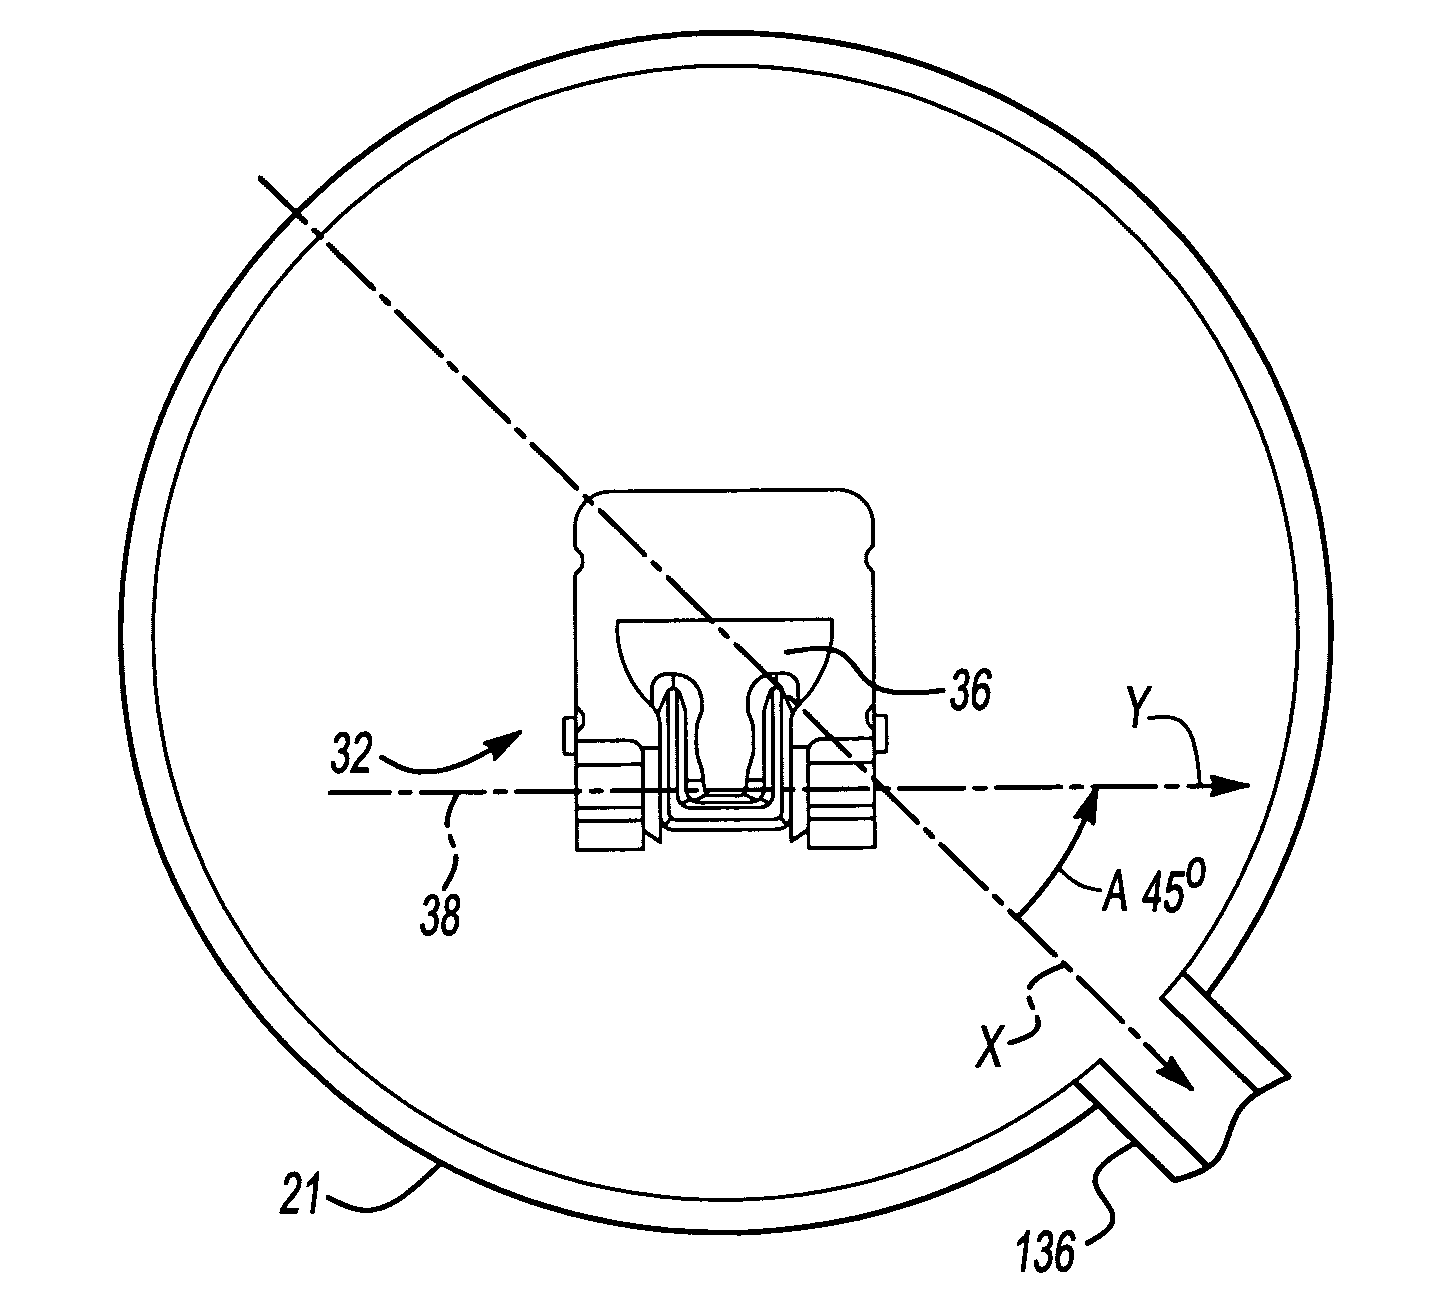 Compressor with check valve orientated at angle relative to discharge tube